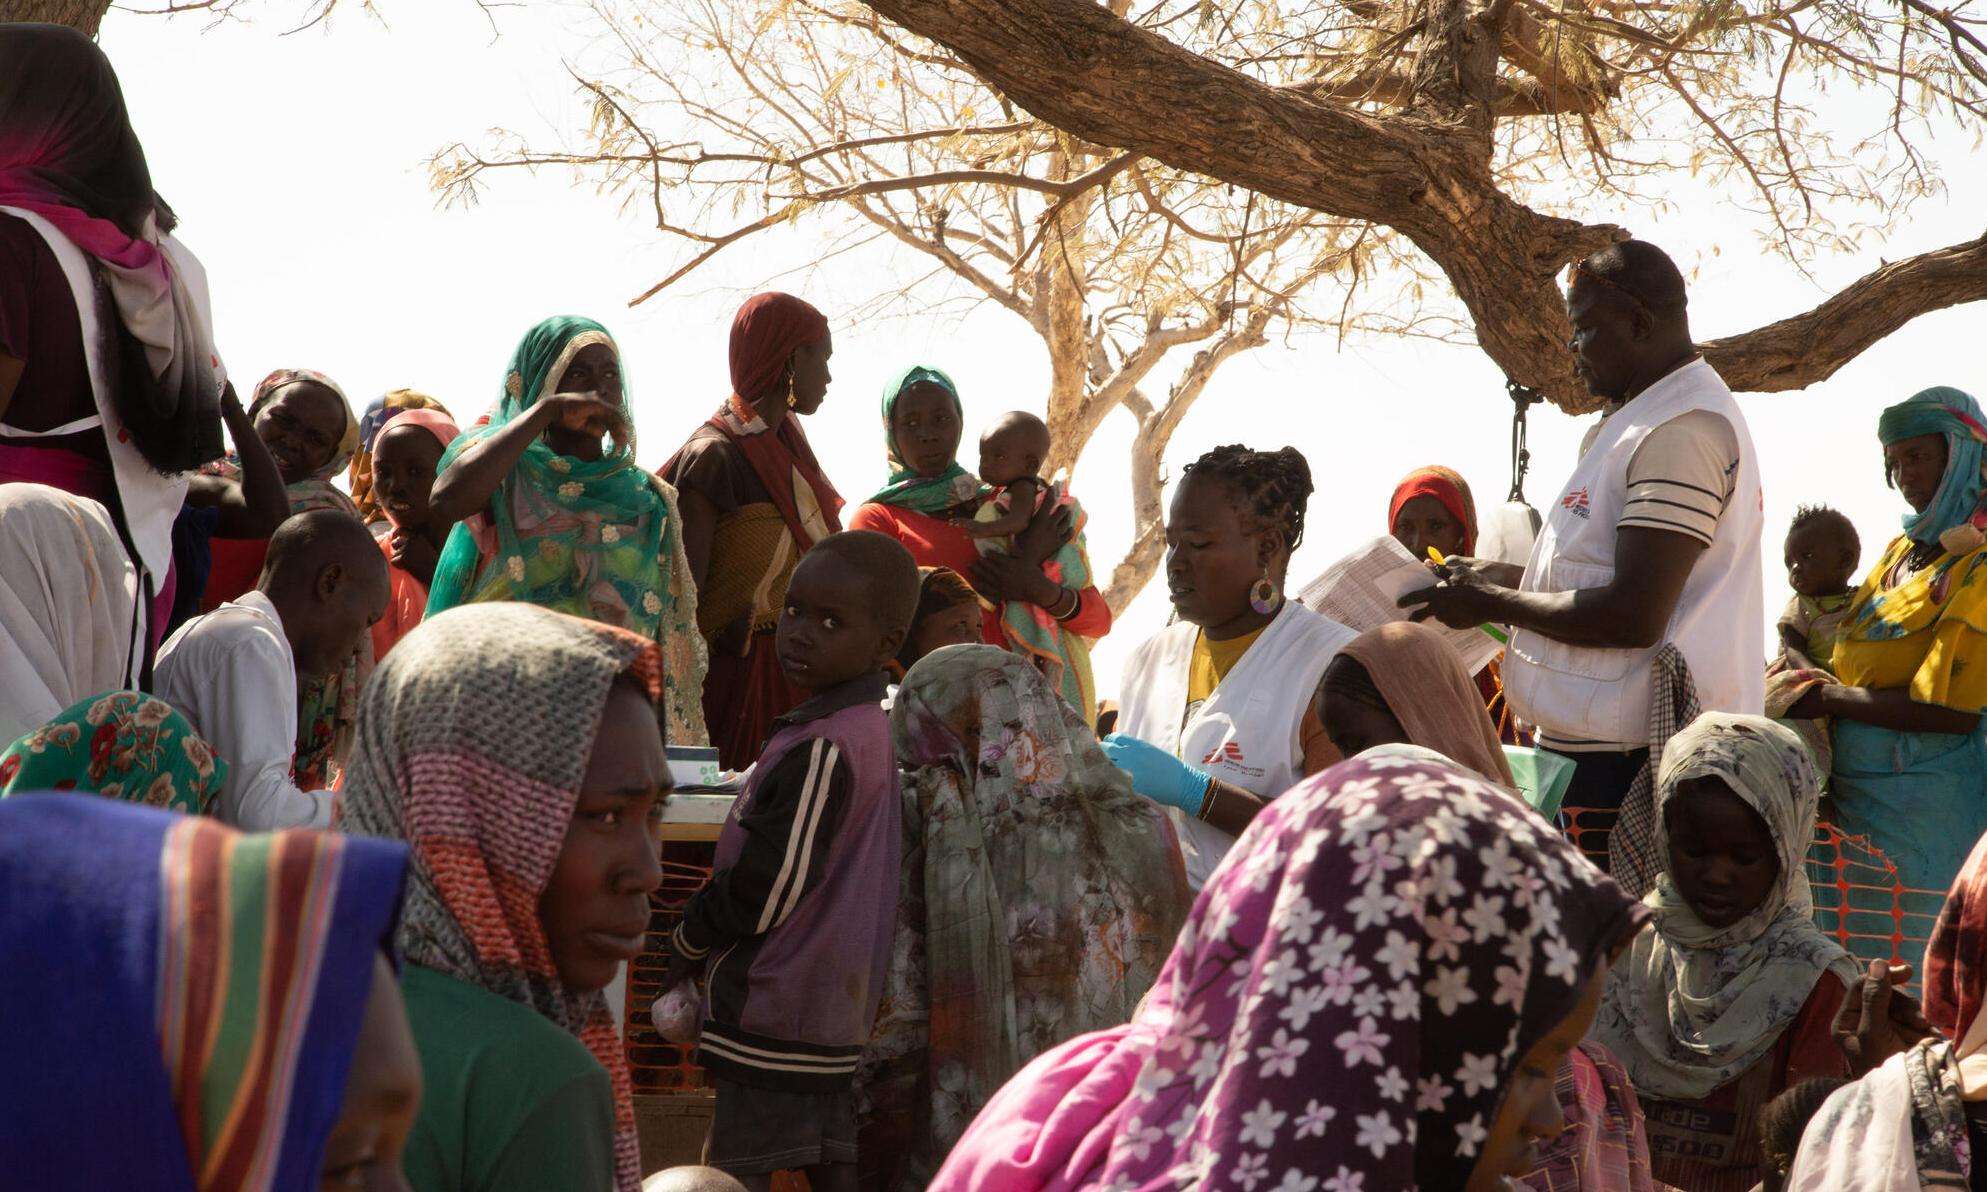 MSF staff triage patients at Daguessa refugee camp in Chad.